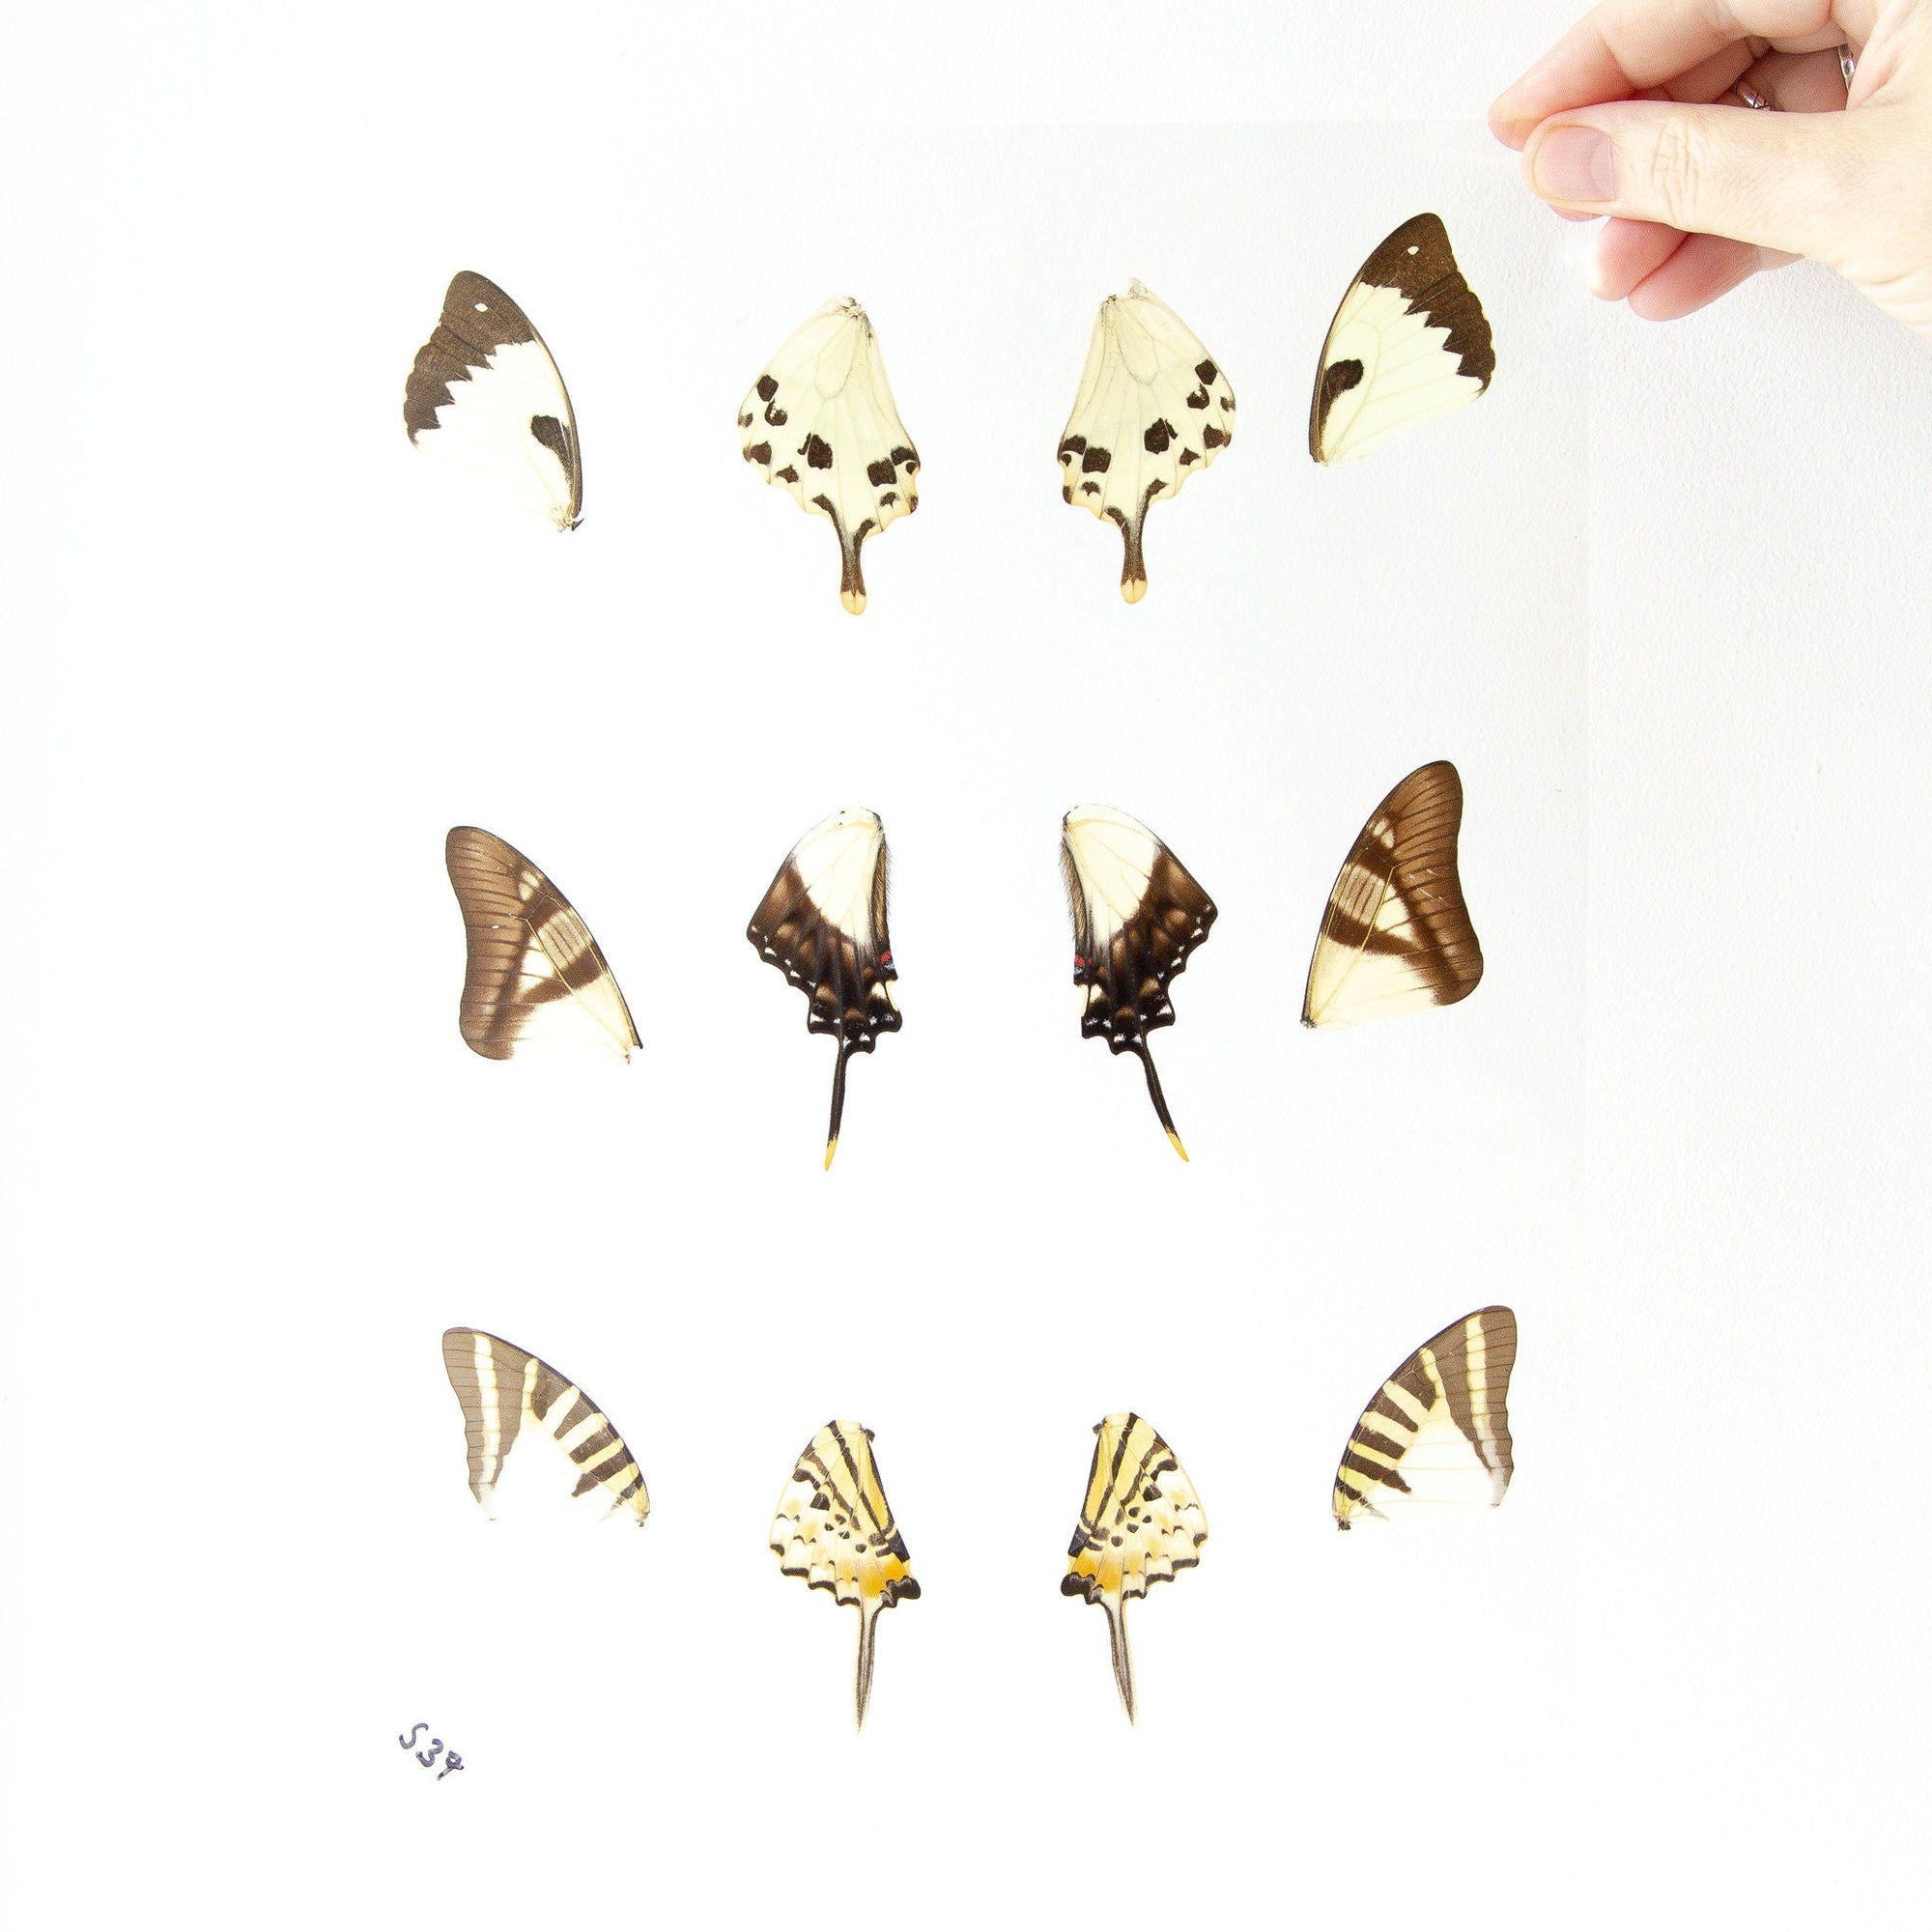 Butterfly Wings GLOSSY LAMINATED SHEET Real Ethically Sourced Specimens Moths Butterflies Wings for Art -- S37